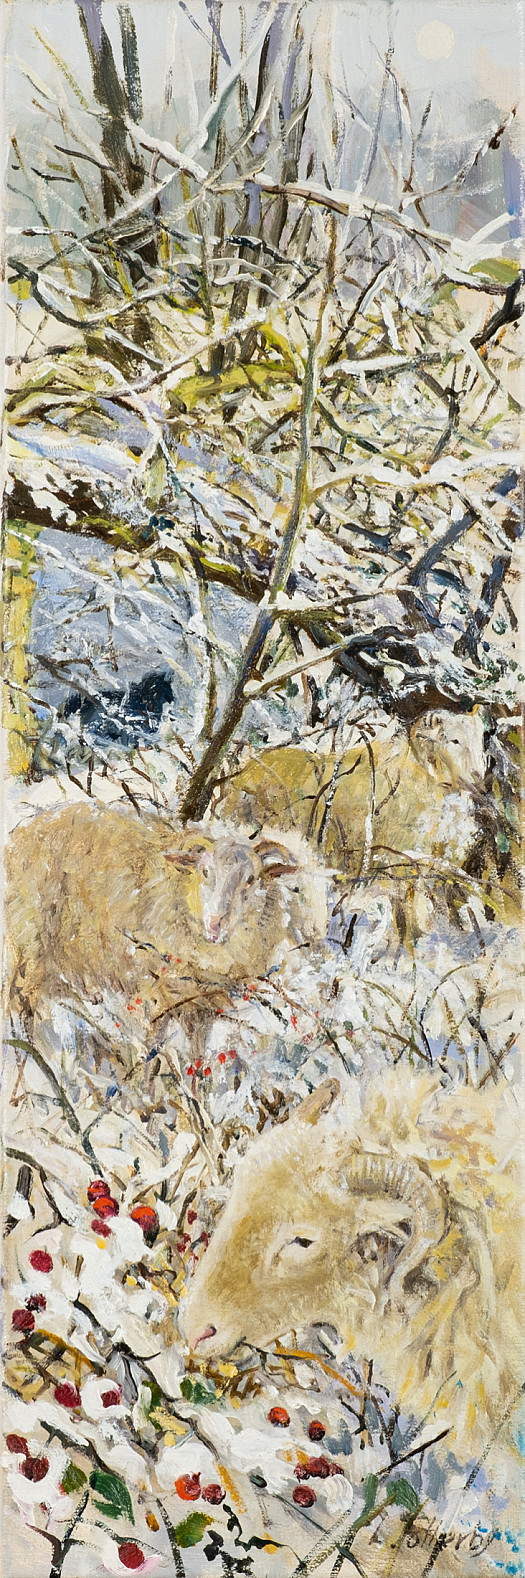 Sheep Grazing in the Snow